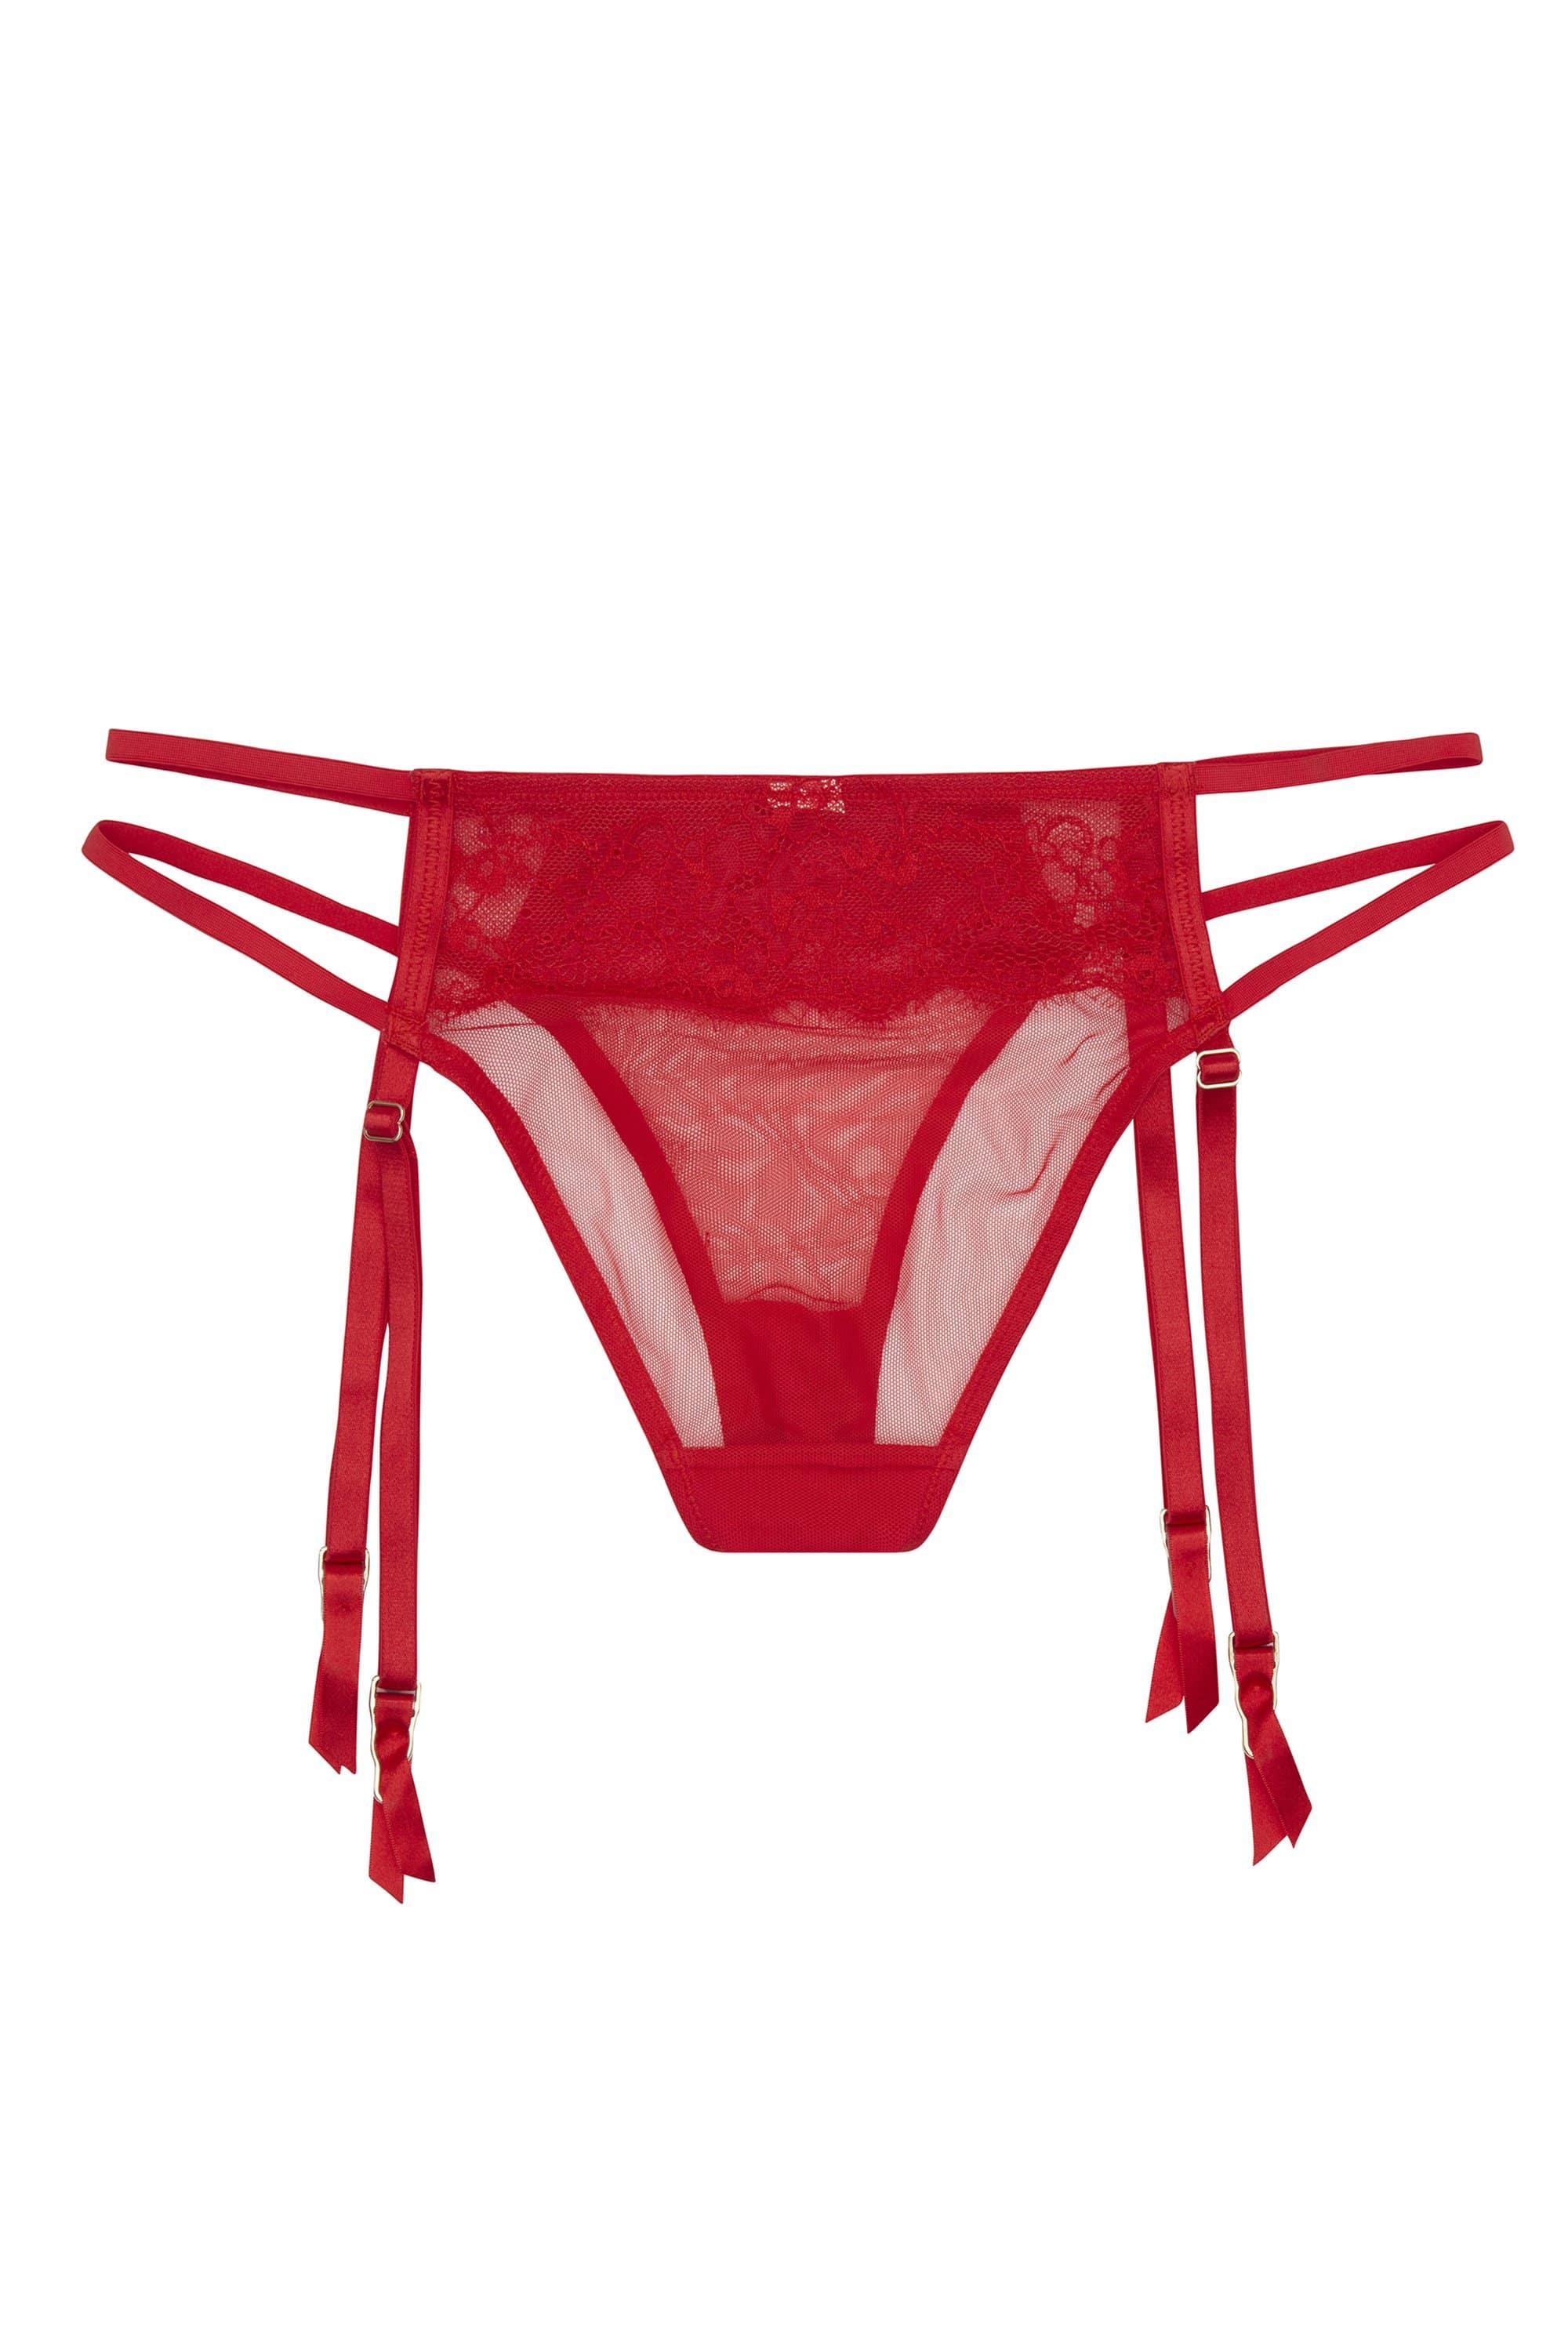 Our Precision Lace Full Brief 👏🏼 @letmetrybeforeyoubuy shows why these  knickers are a must have! Now available in Rosebud, Red and White. Don't  forget